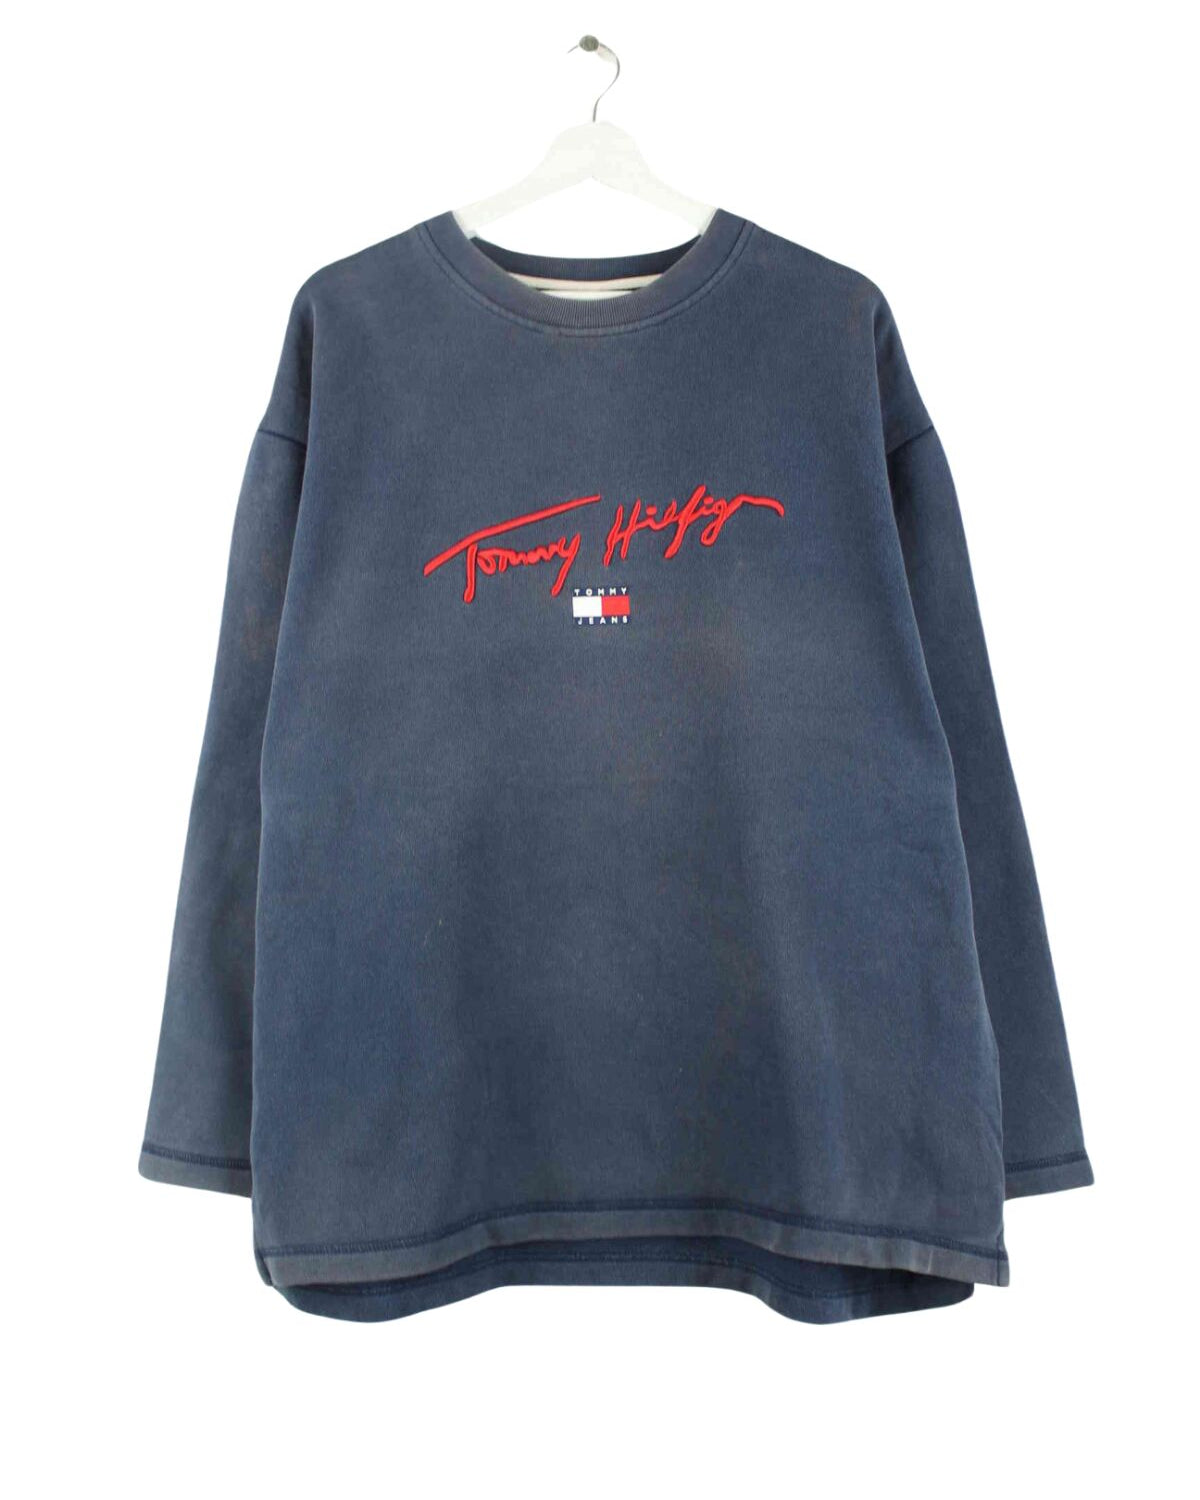 Tommy Hilfiger y2k Embroidered Sweater Blau M (front image)